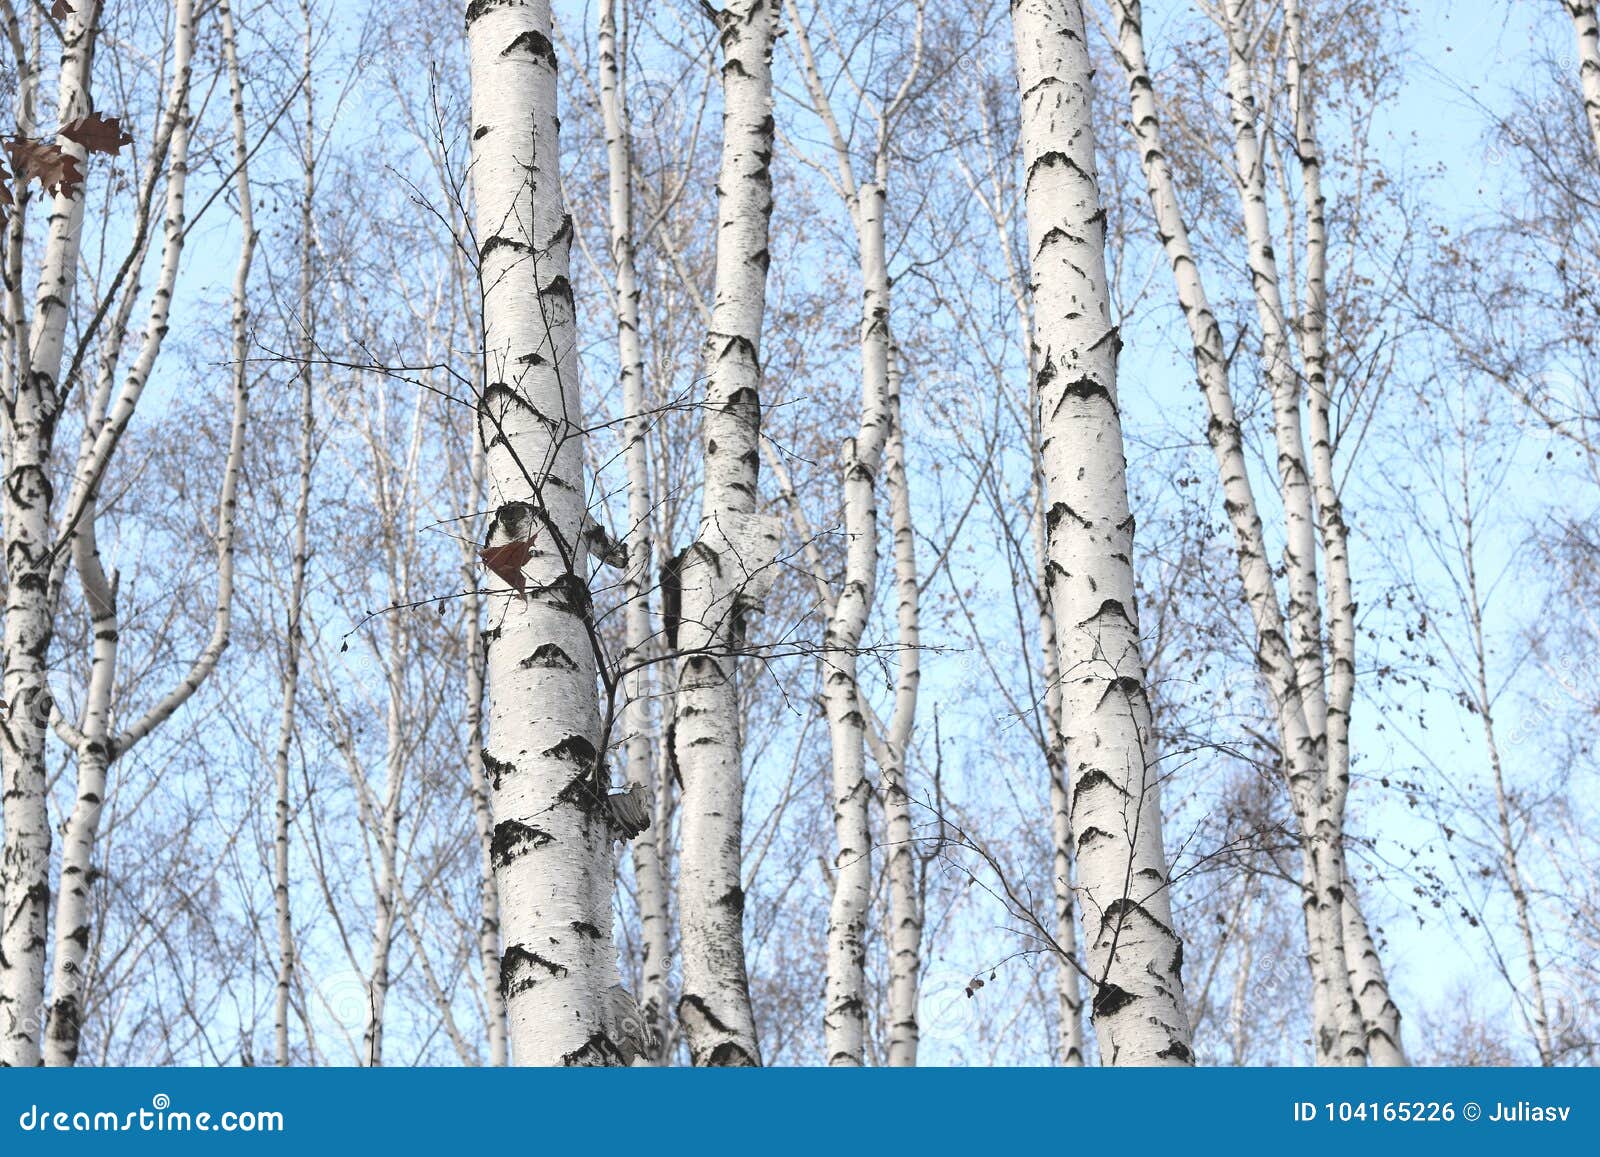 Beautiful Landscape With White Birches Stock Photo Image Of Forest